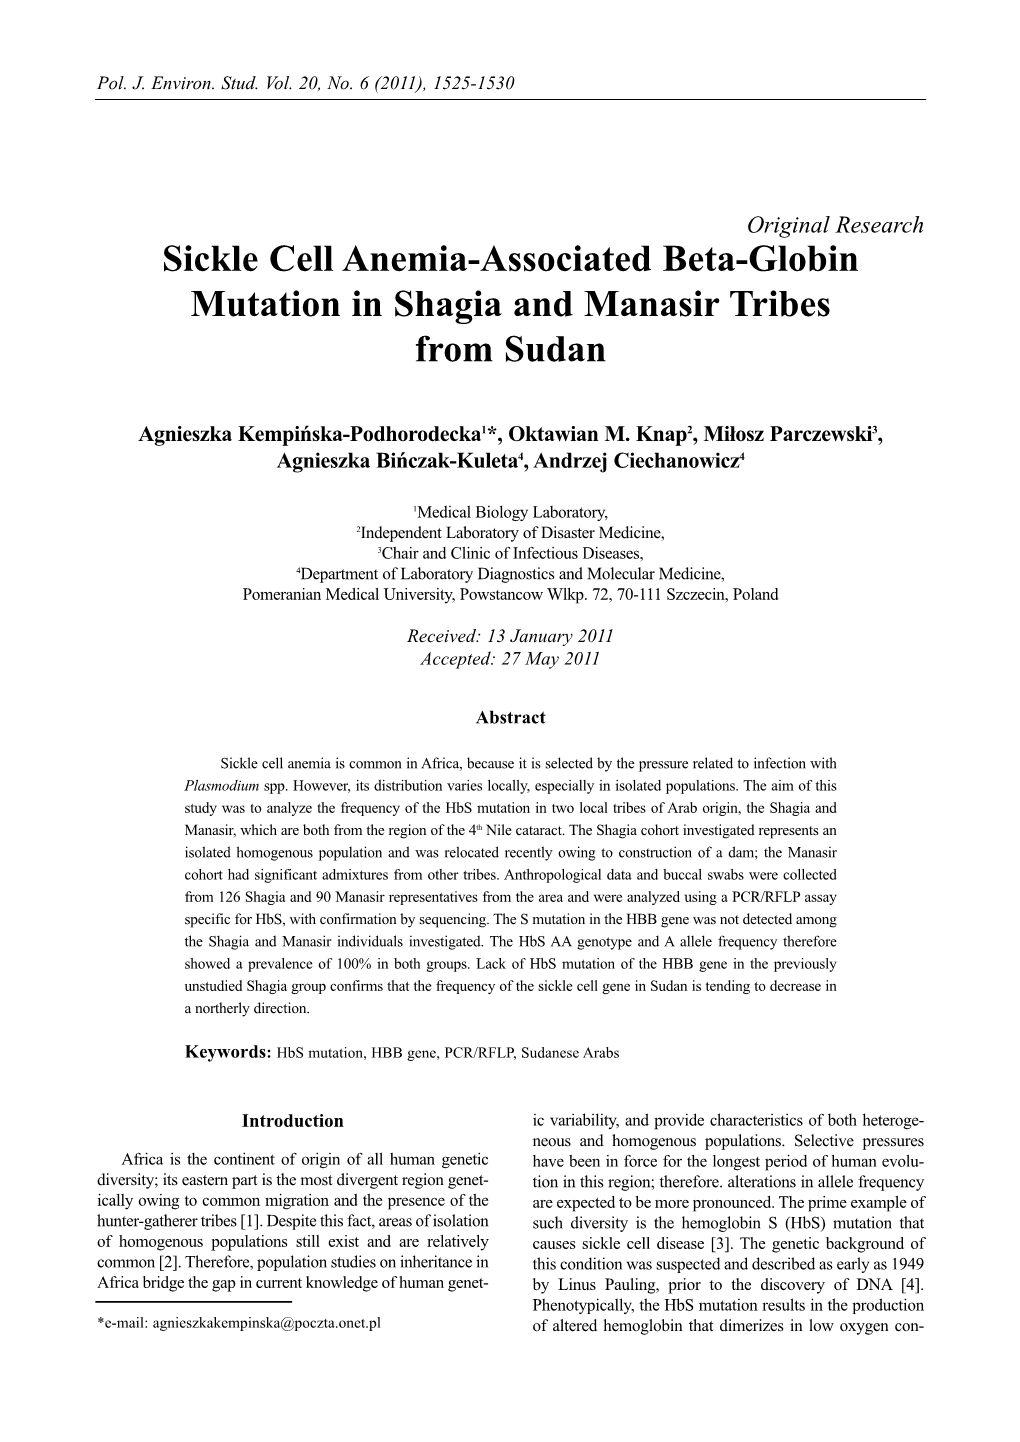 Sickle Cell Anemia-Associated Beta-Globin Mutation in Shagia and Manasir Tribes from Sudan